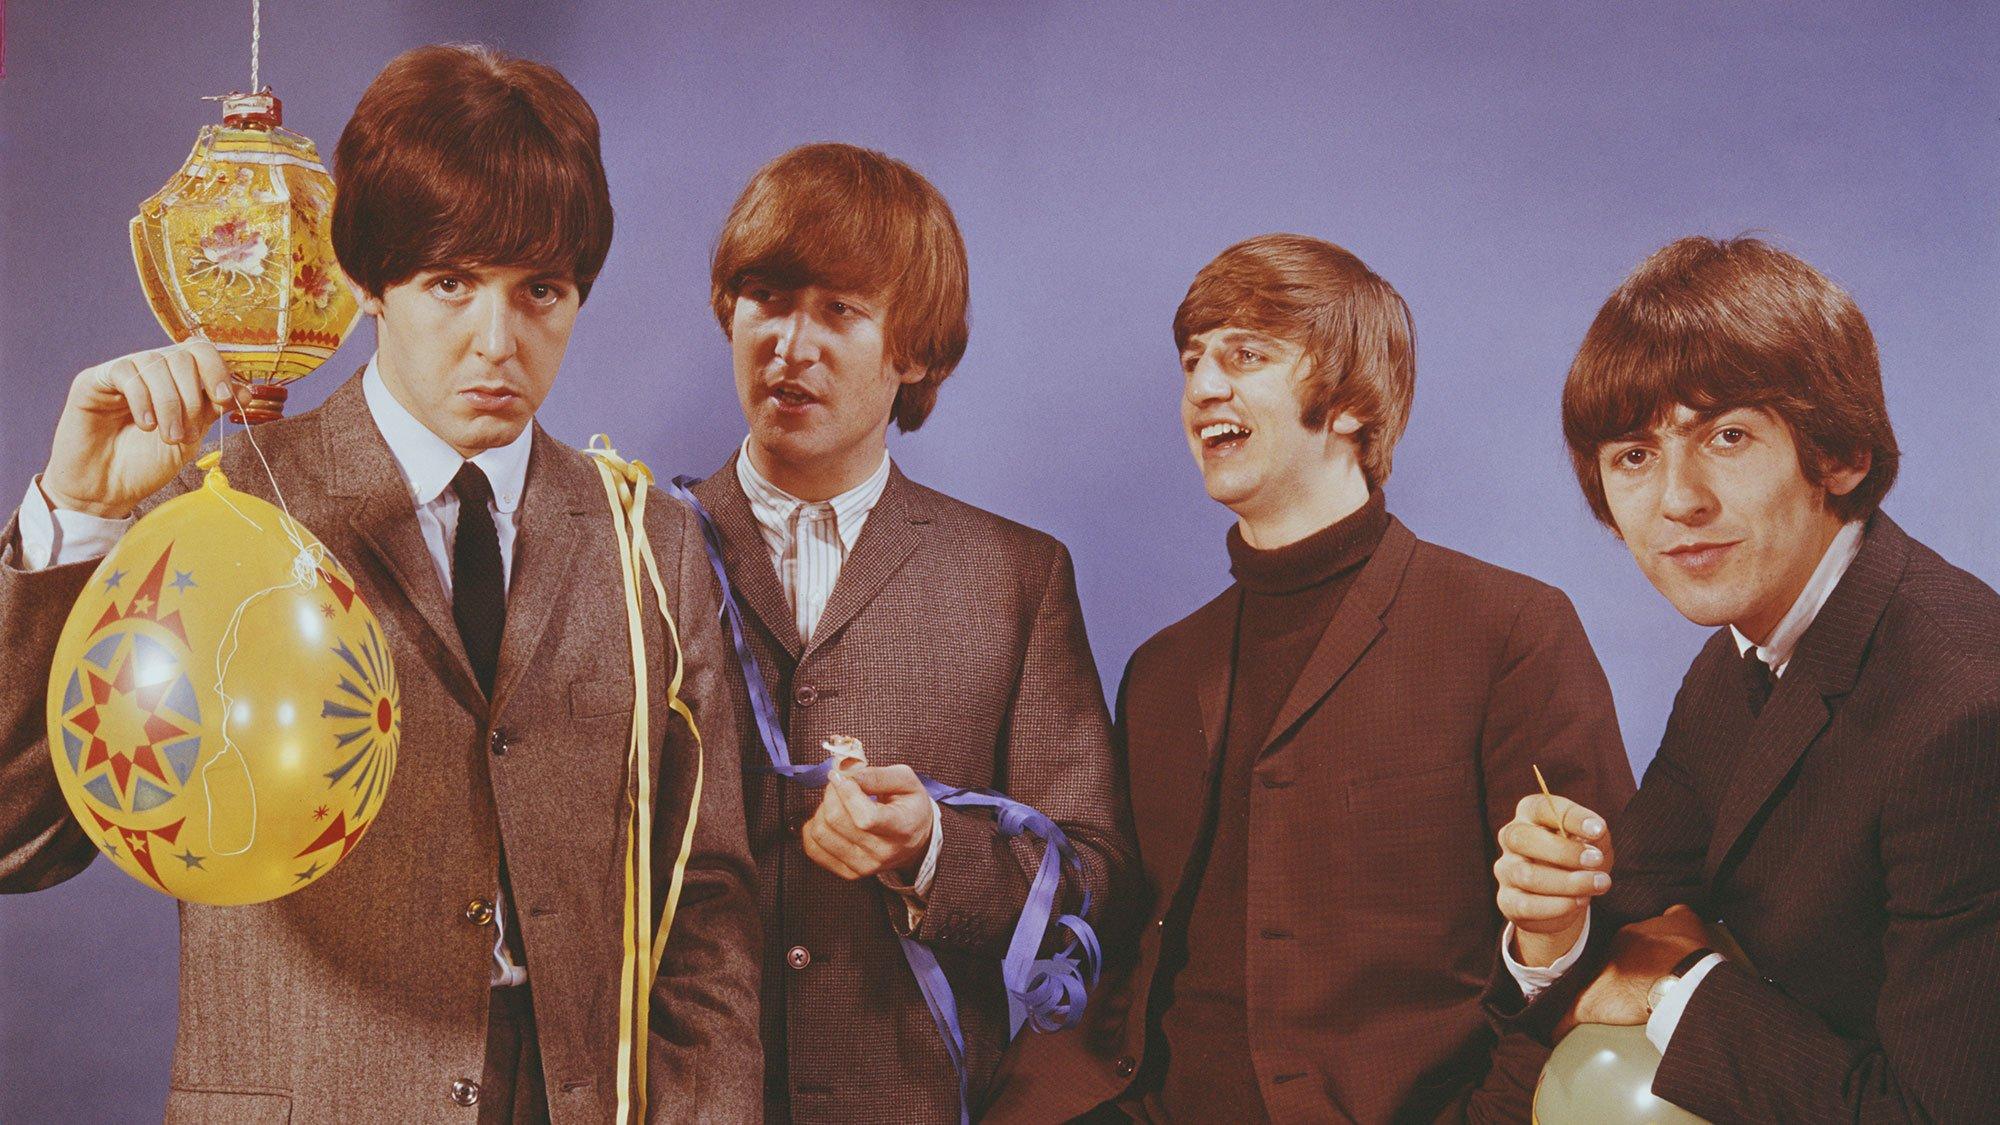 The Beatles Mounted One Of The Most Unexpected Comebacks In Music